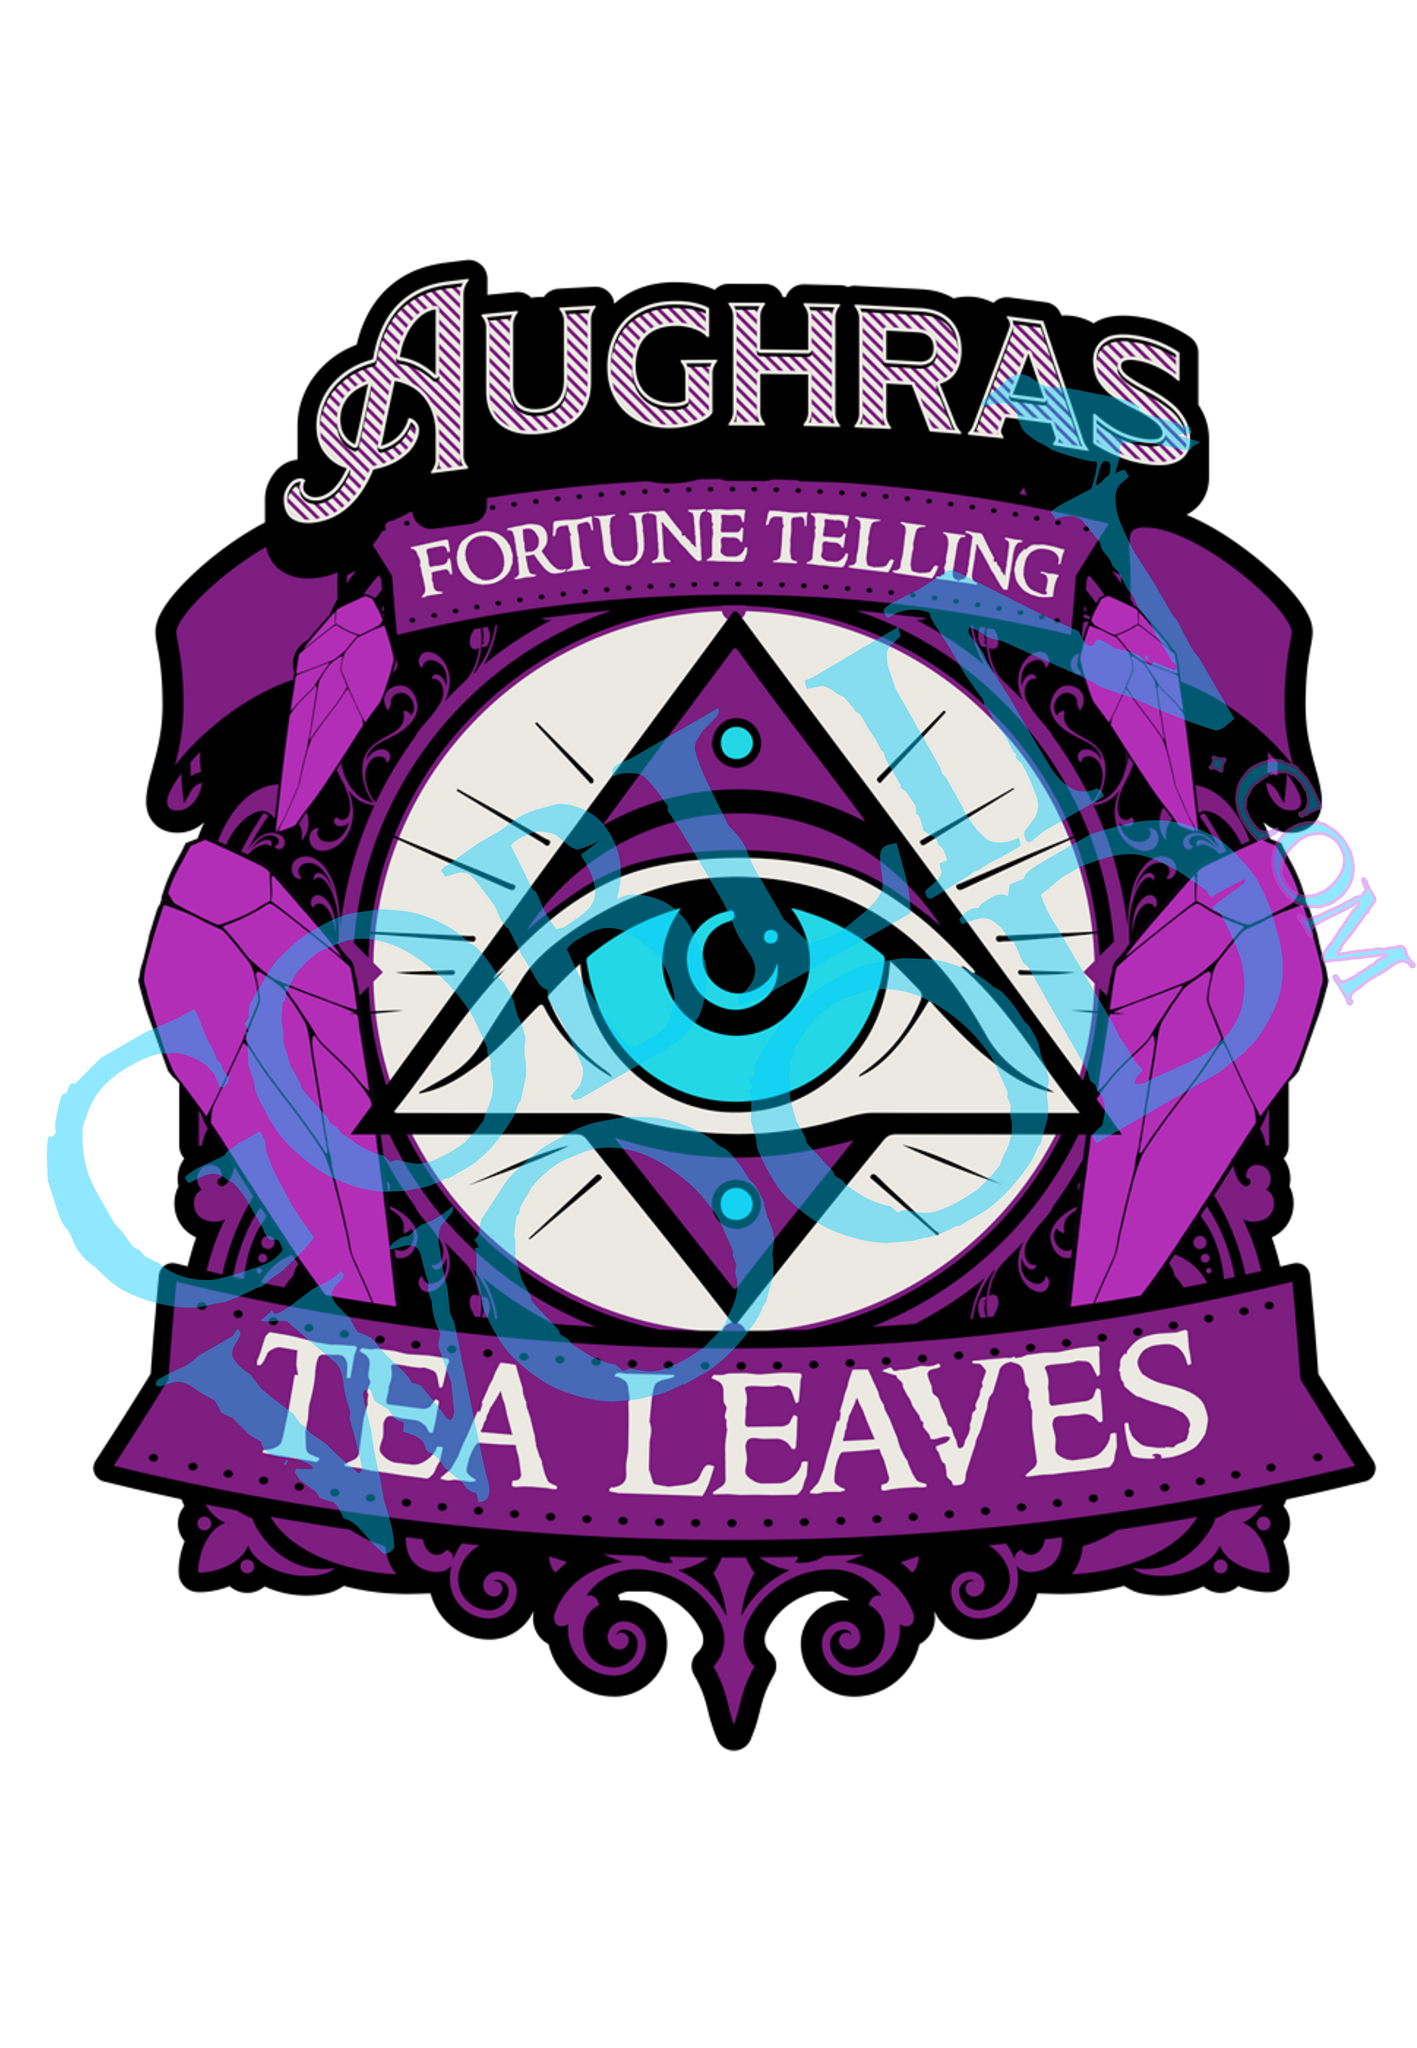 Aughras Fortune Telling Tea Leaves Potion - The Dark Crystal Inspired